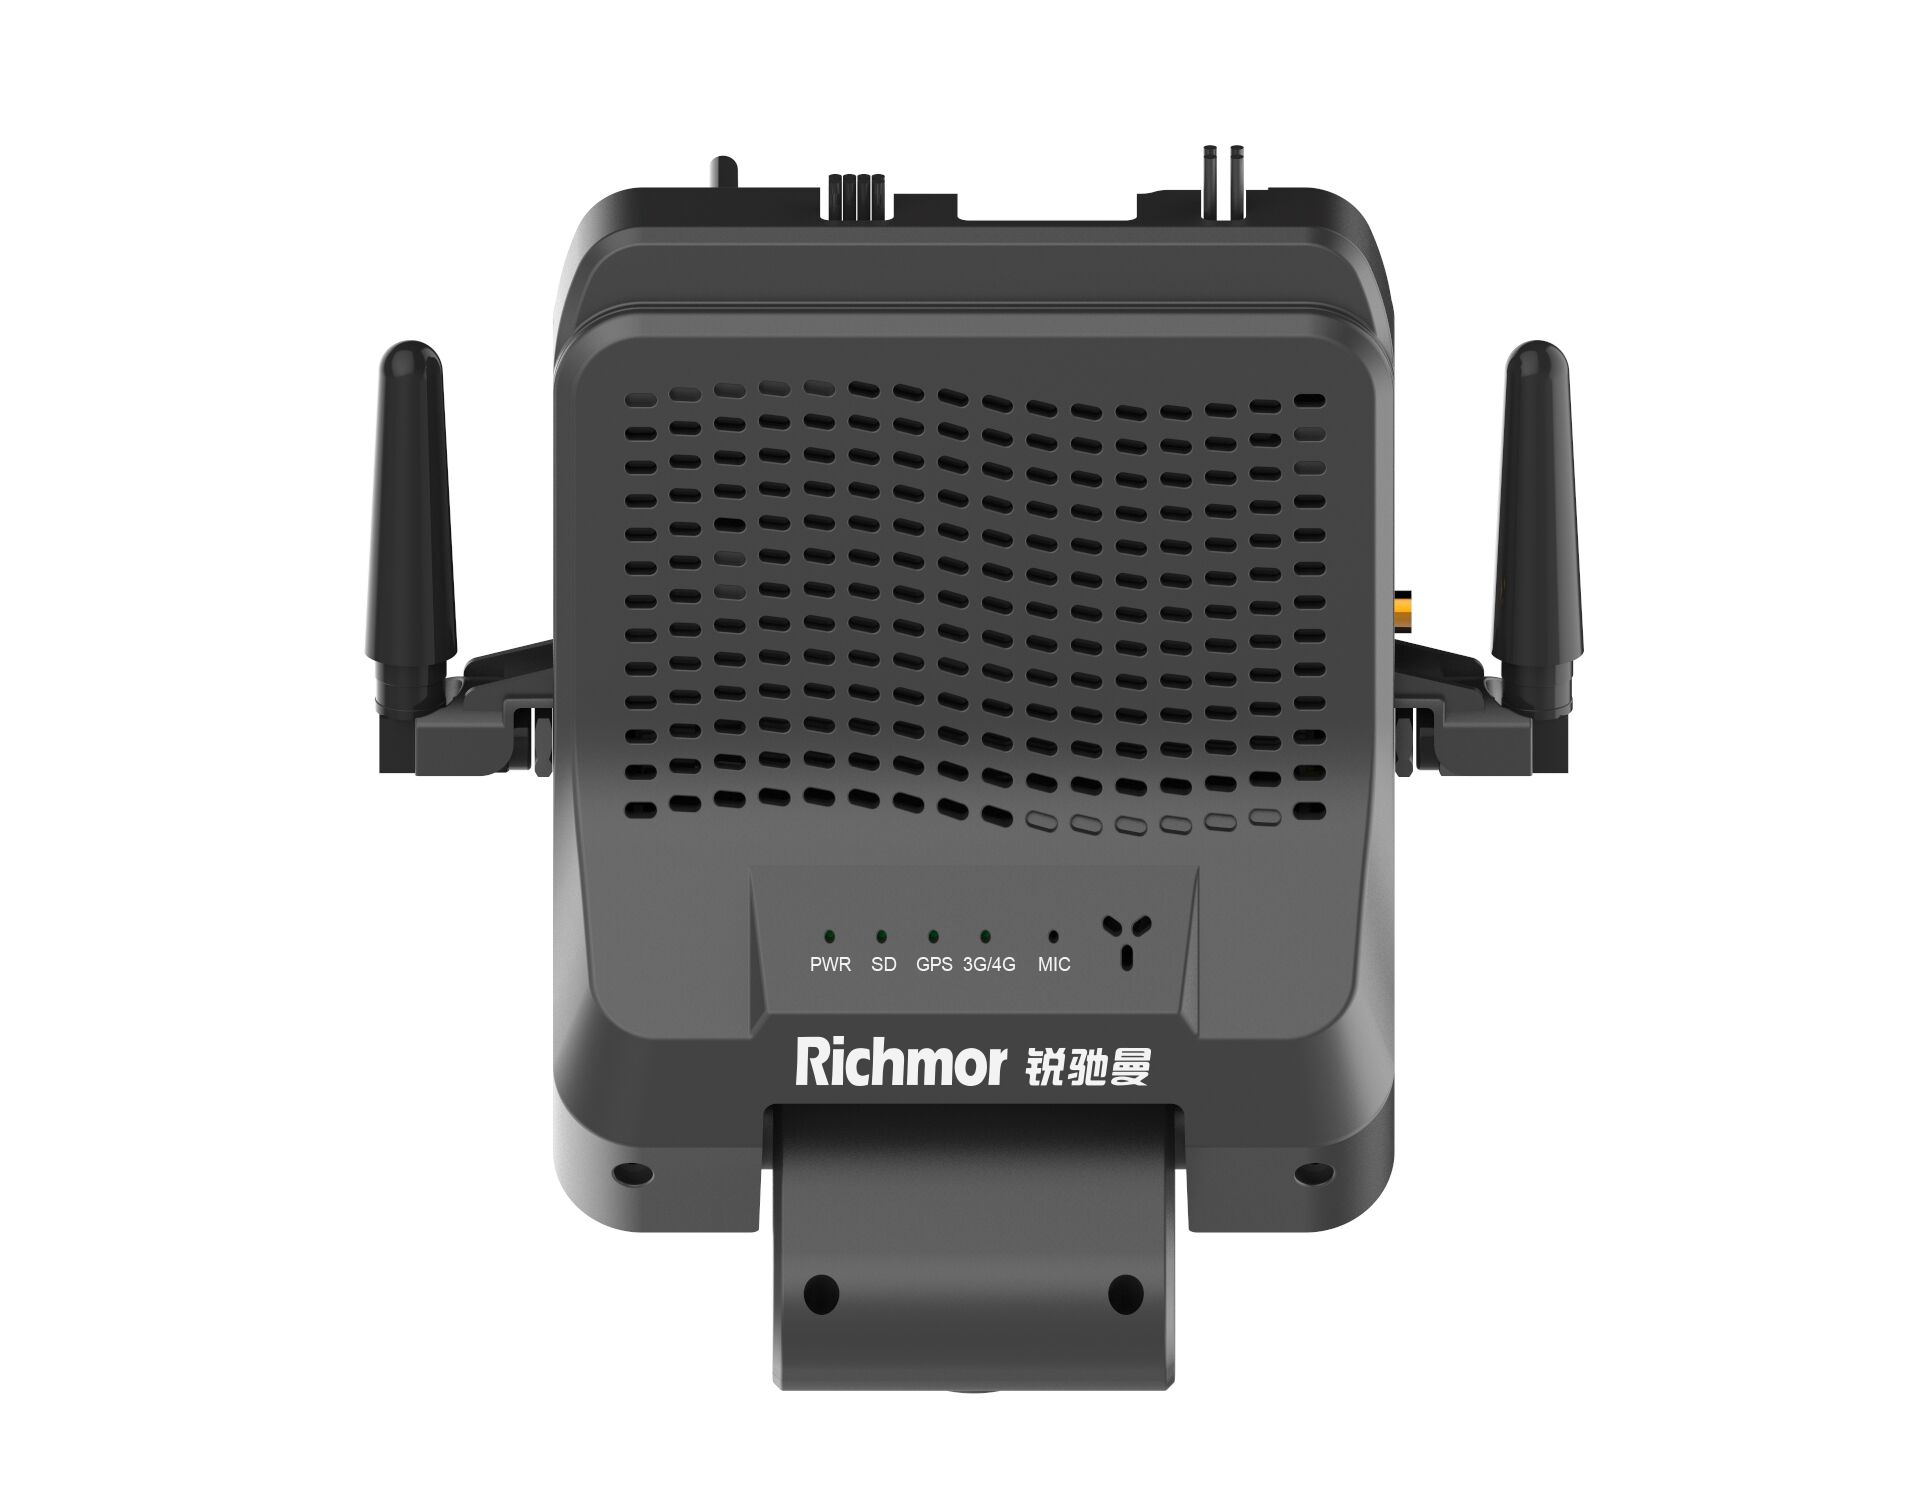 Richmor high-integrated artificial intelligent driver status detection MDVR 3G 4G WIFI GPS SD card mini mobile DVR more than dash cam